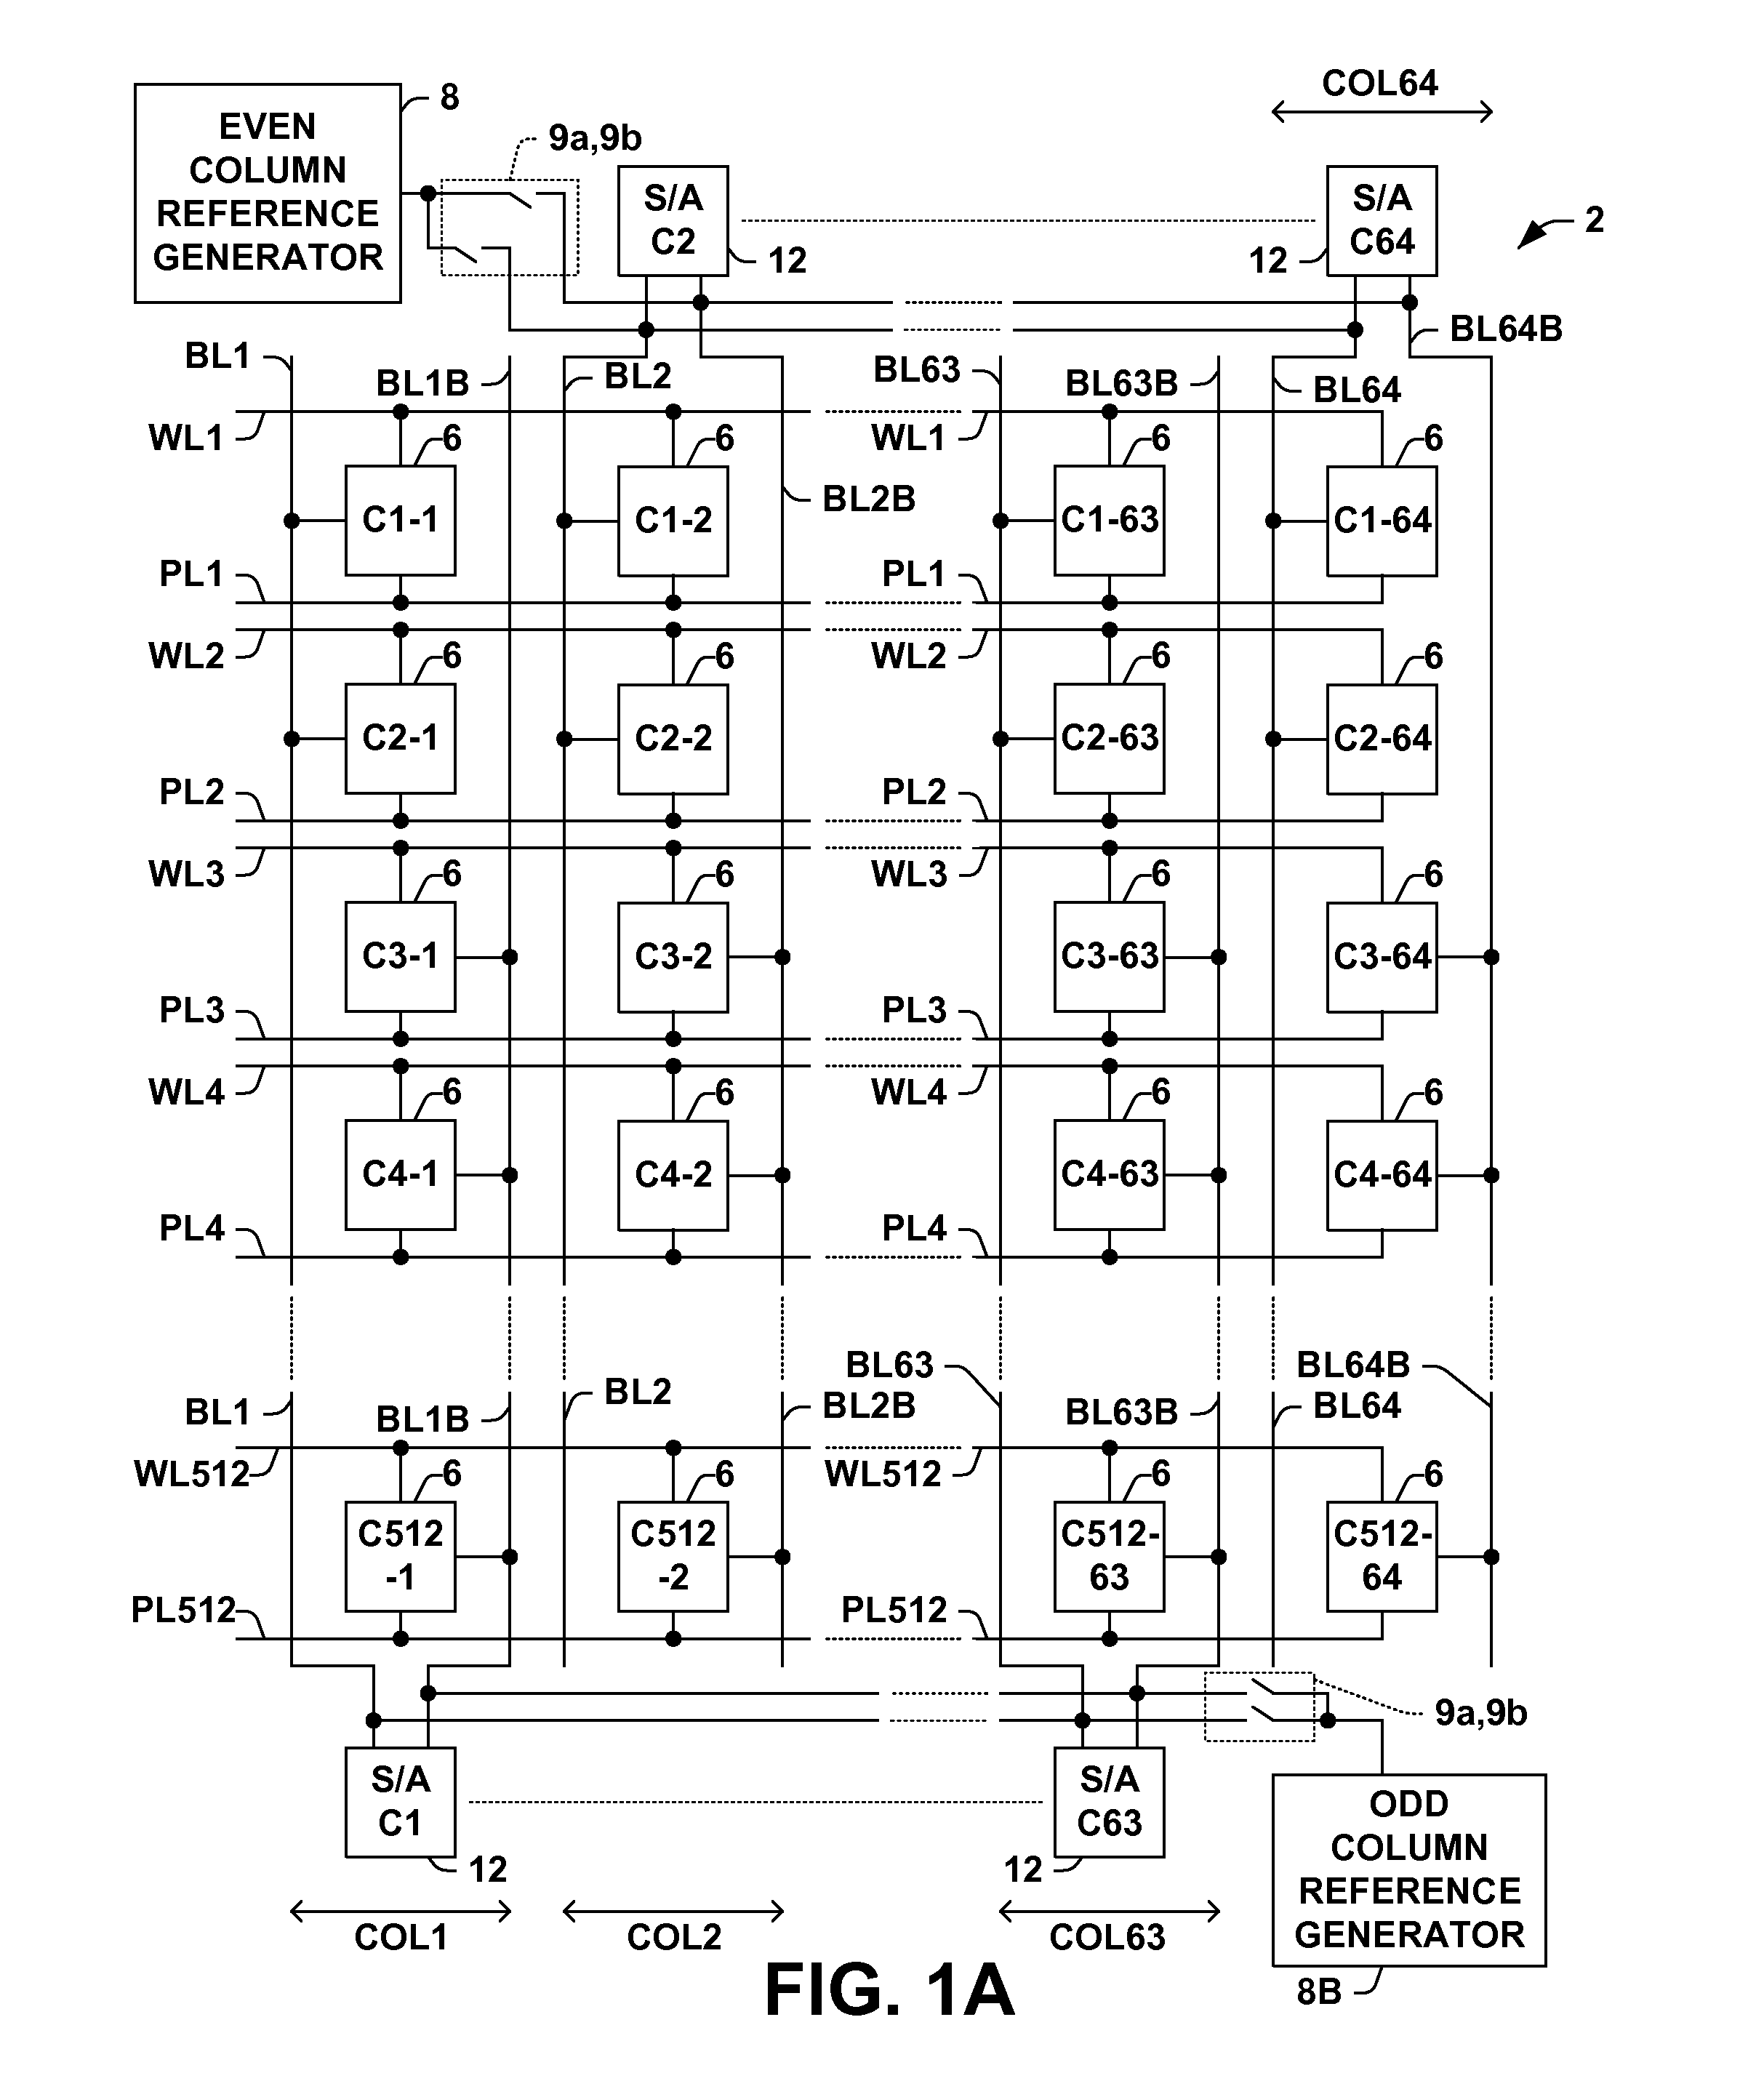 Ferroelectric memory array for implementing a zero cancellation scheme to reduce plateline voltage in ferroelectric memory